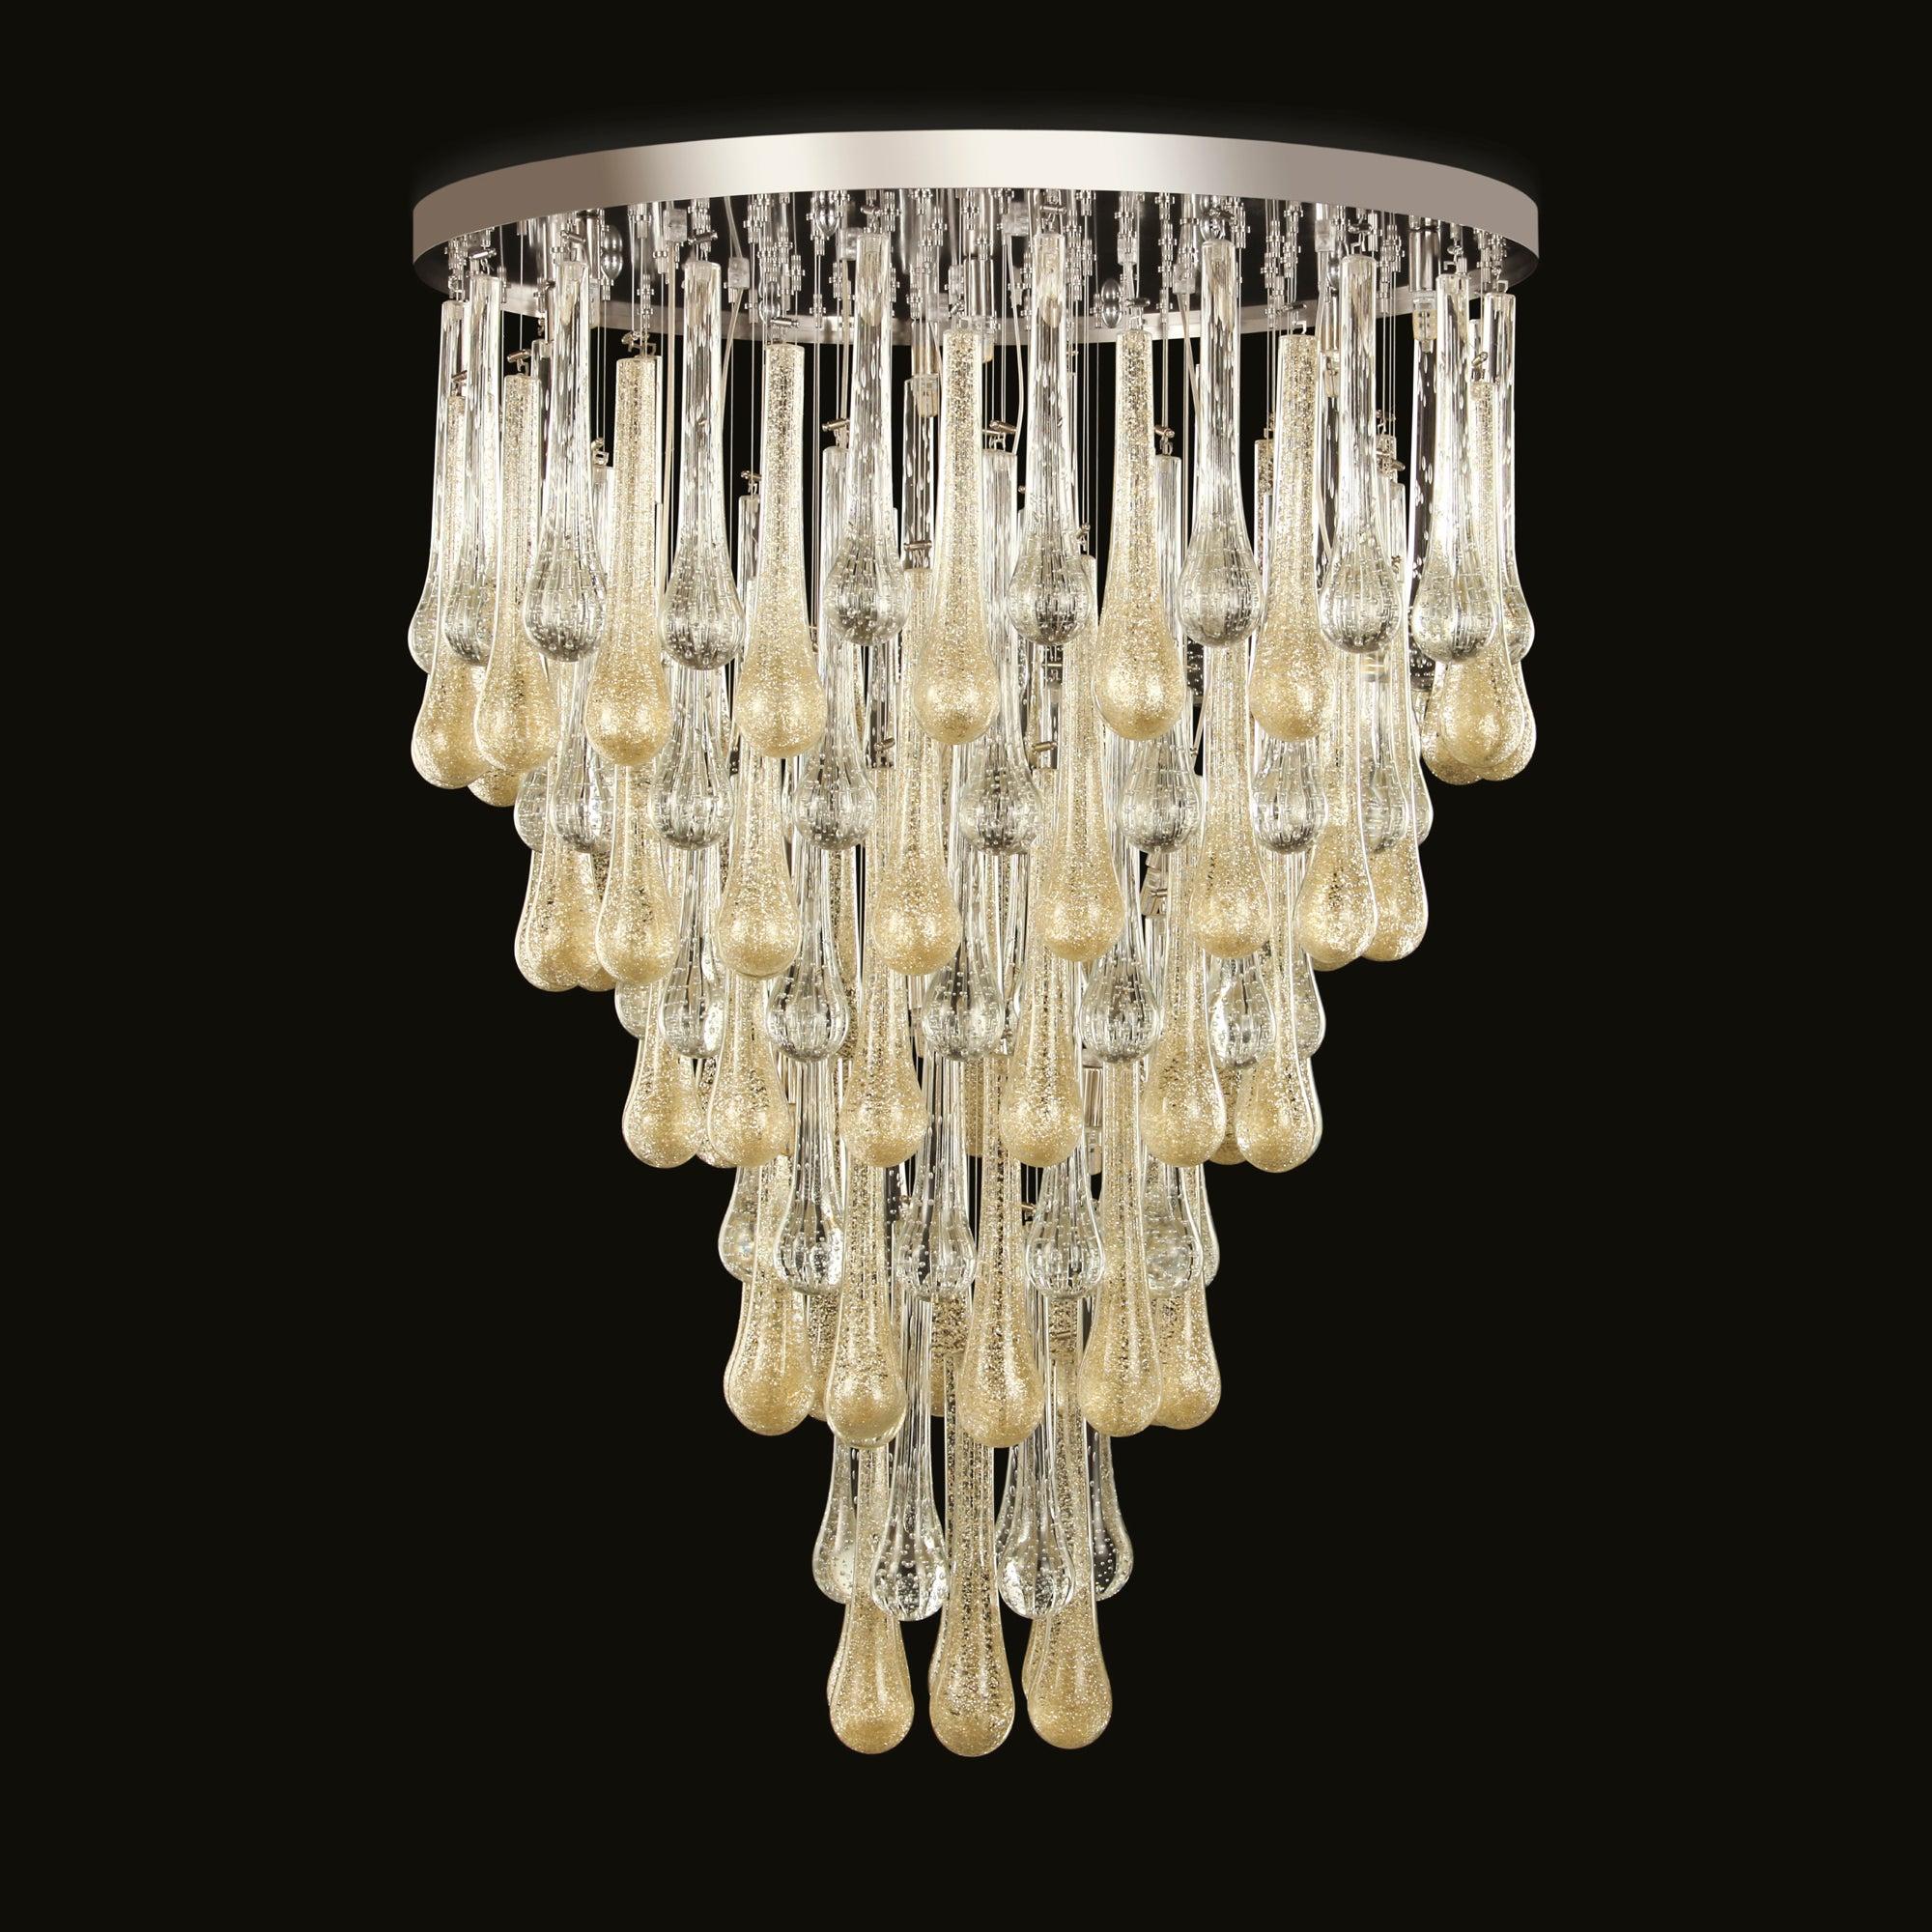 Italian flush mount or chandelier with Murano teardrop-shaped glasses hand blown with real gold, real silver and bubbles inside, mounted on chrome frame by Fabio Ltd / Made in Italy
15 lights / G9 type / max 25W each light
Measures: Diameter 29.5